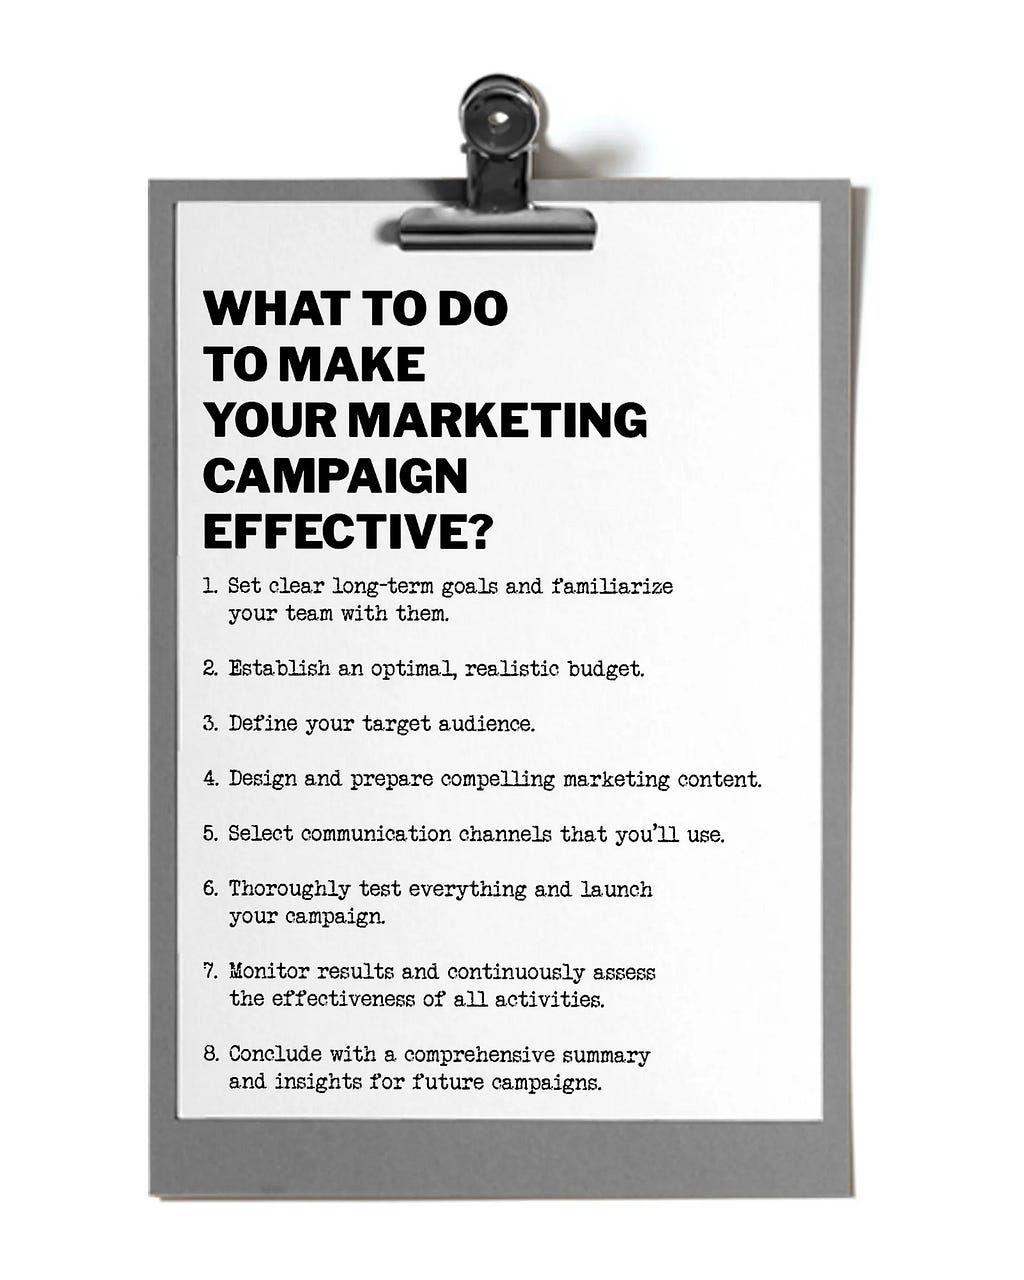 Ways to make your marketing campaign effective presented on paper